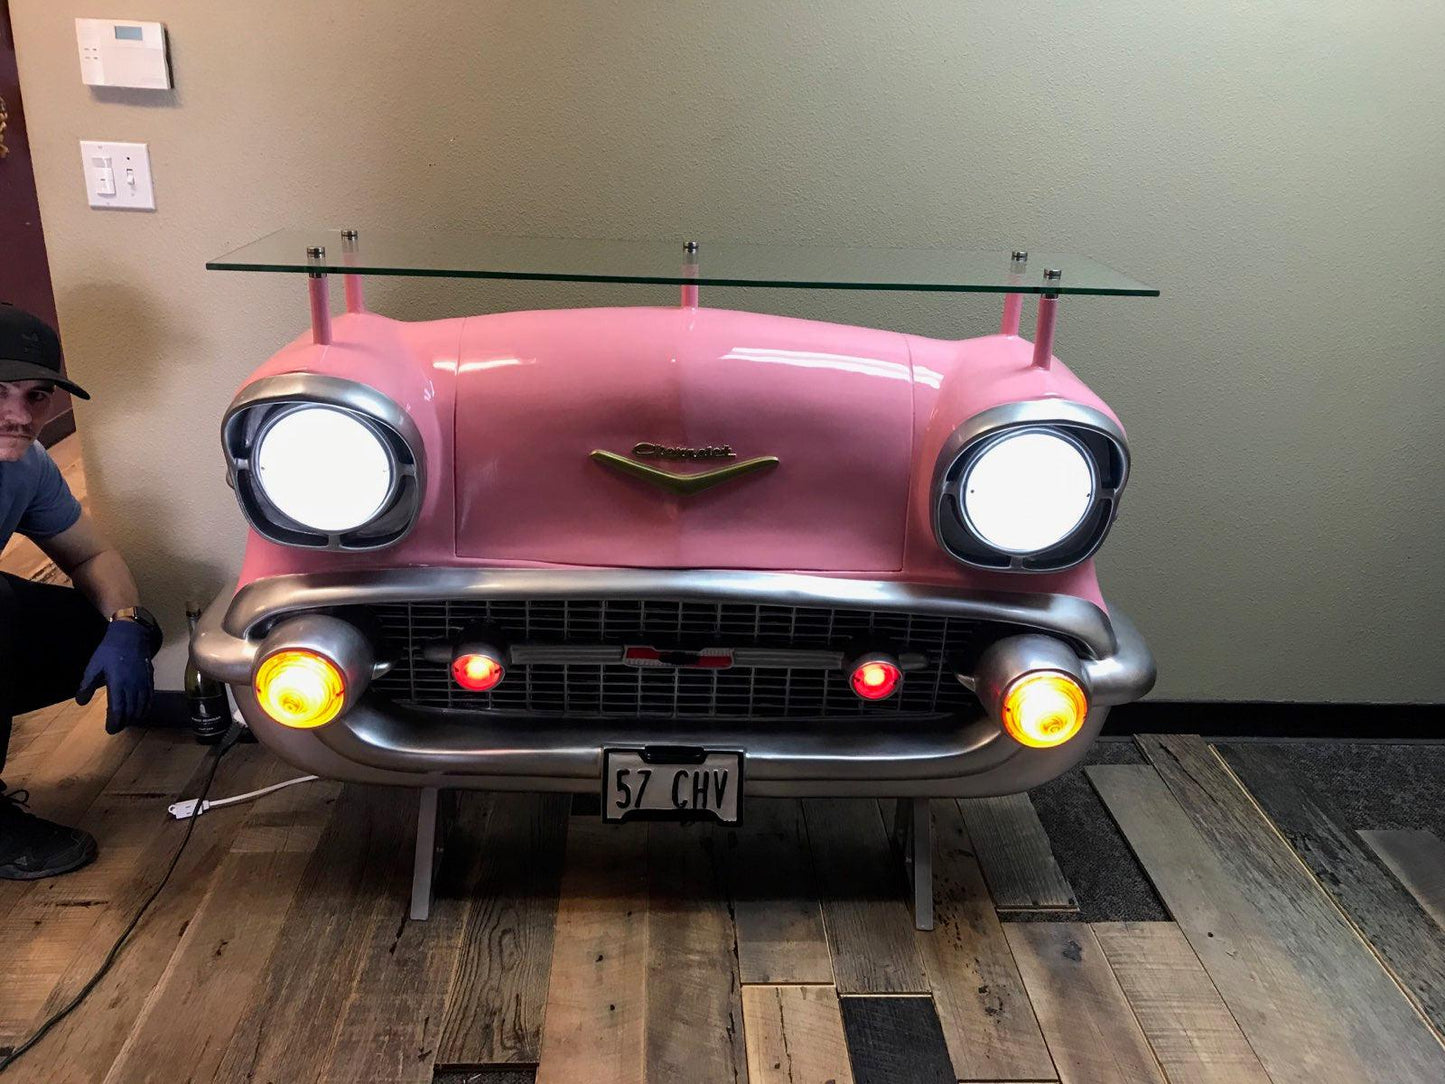 Pink Chevy Bar Life Size Statue